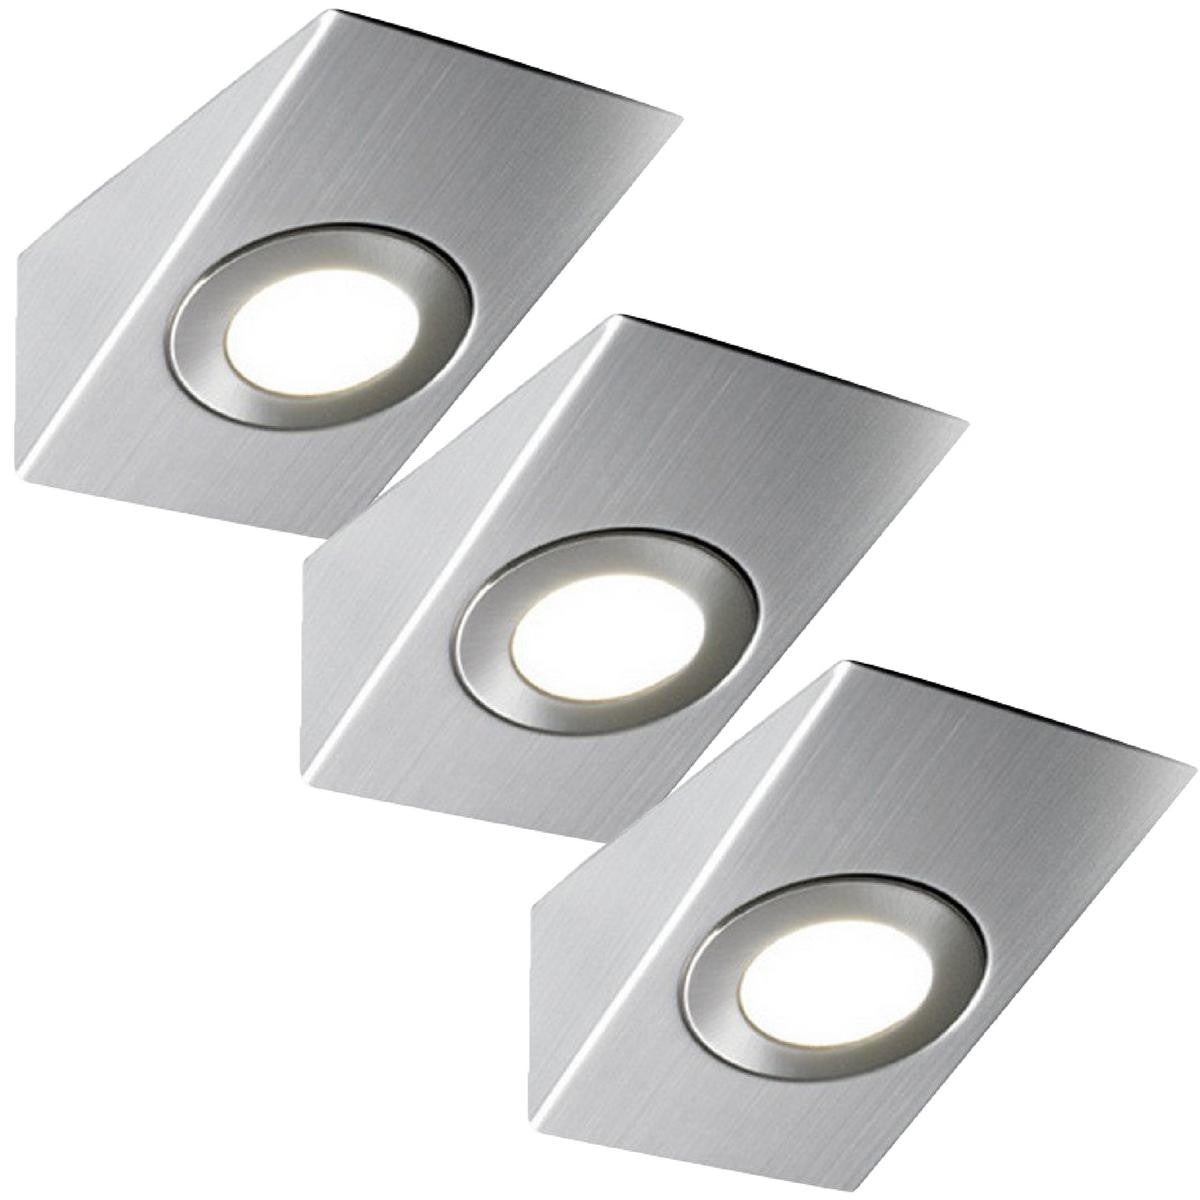 View 3 Pack Wedge Under Cabinet Lights information